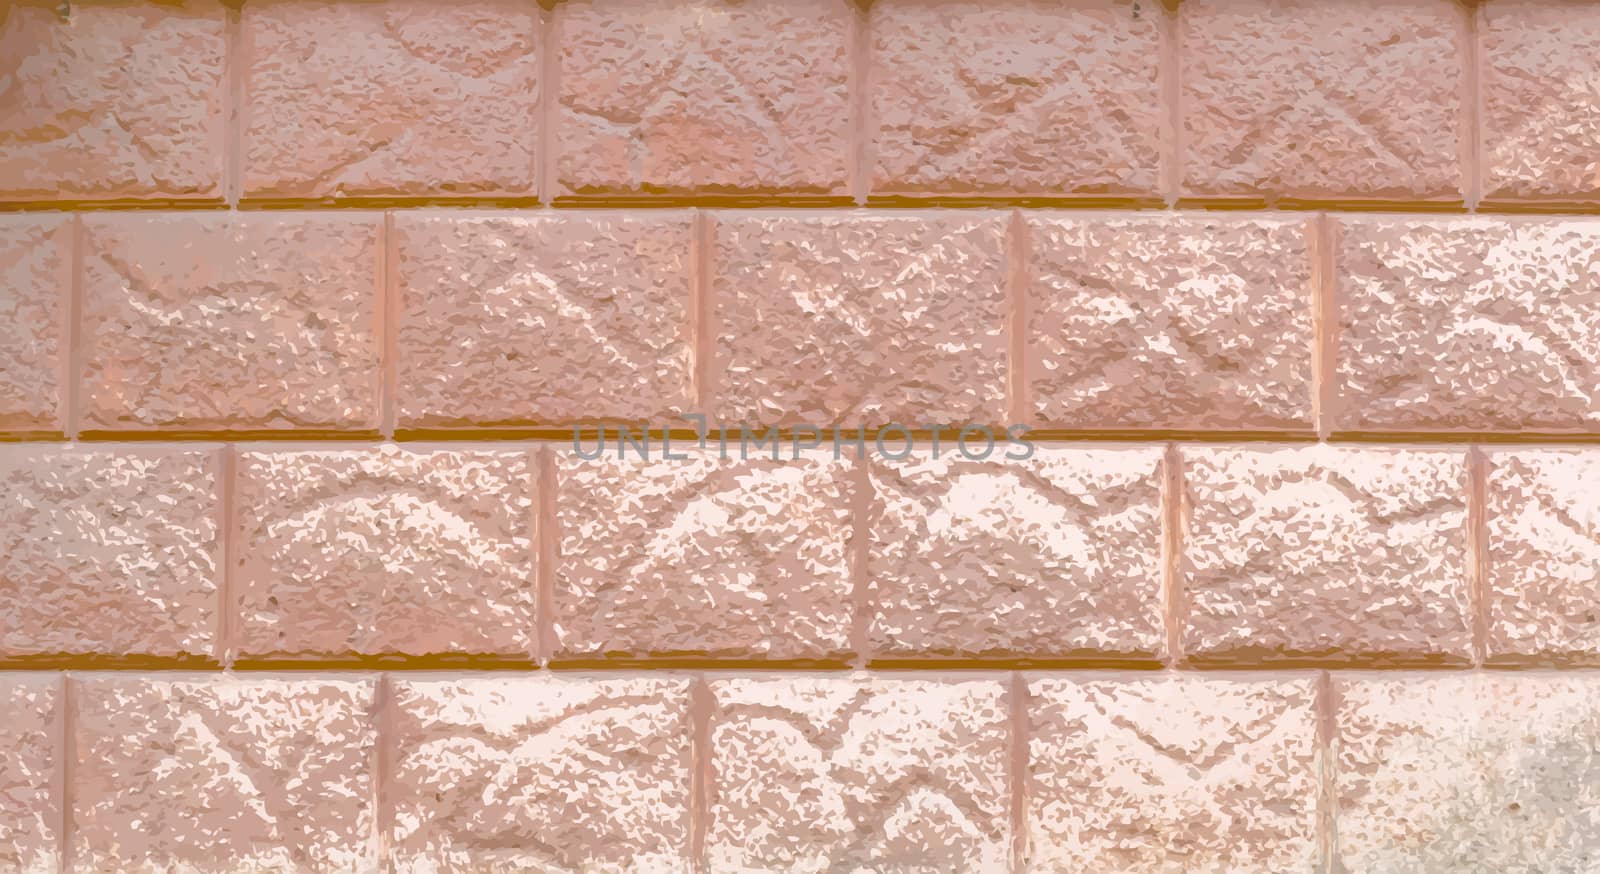 Background image in the form of a rectangular piece of decorative finishing outer walls of the building brown tone